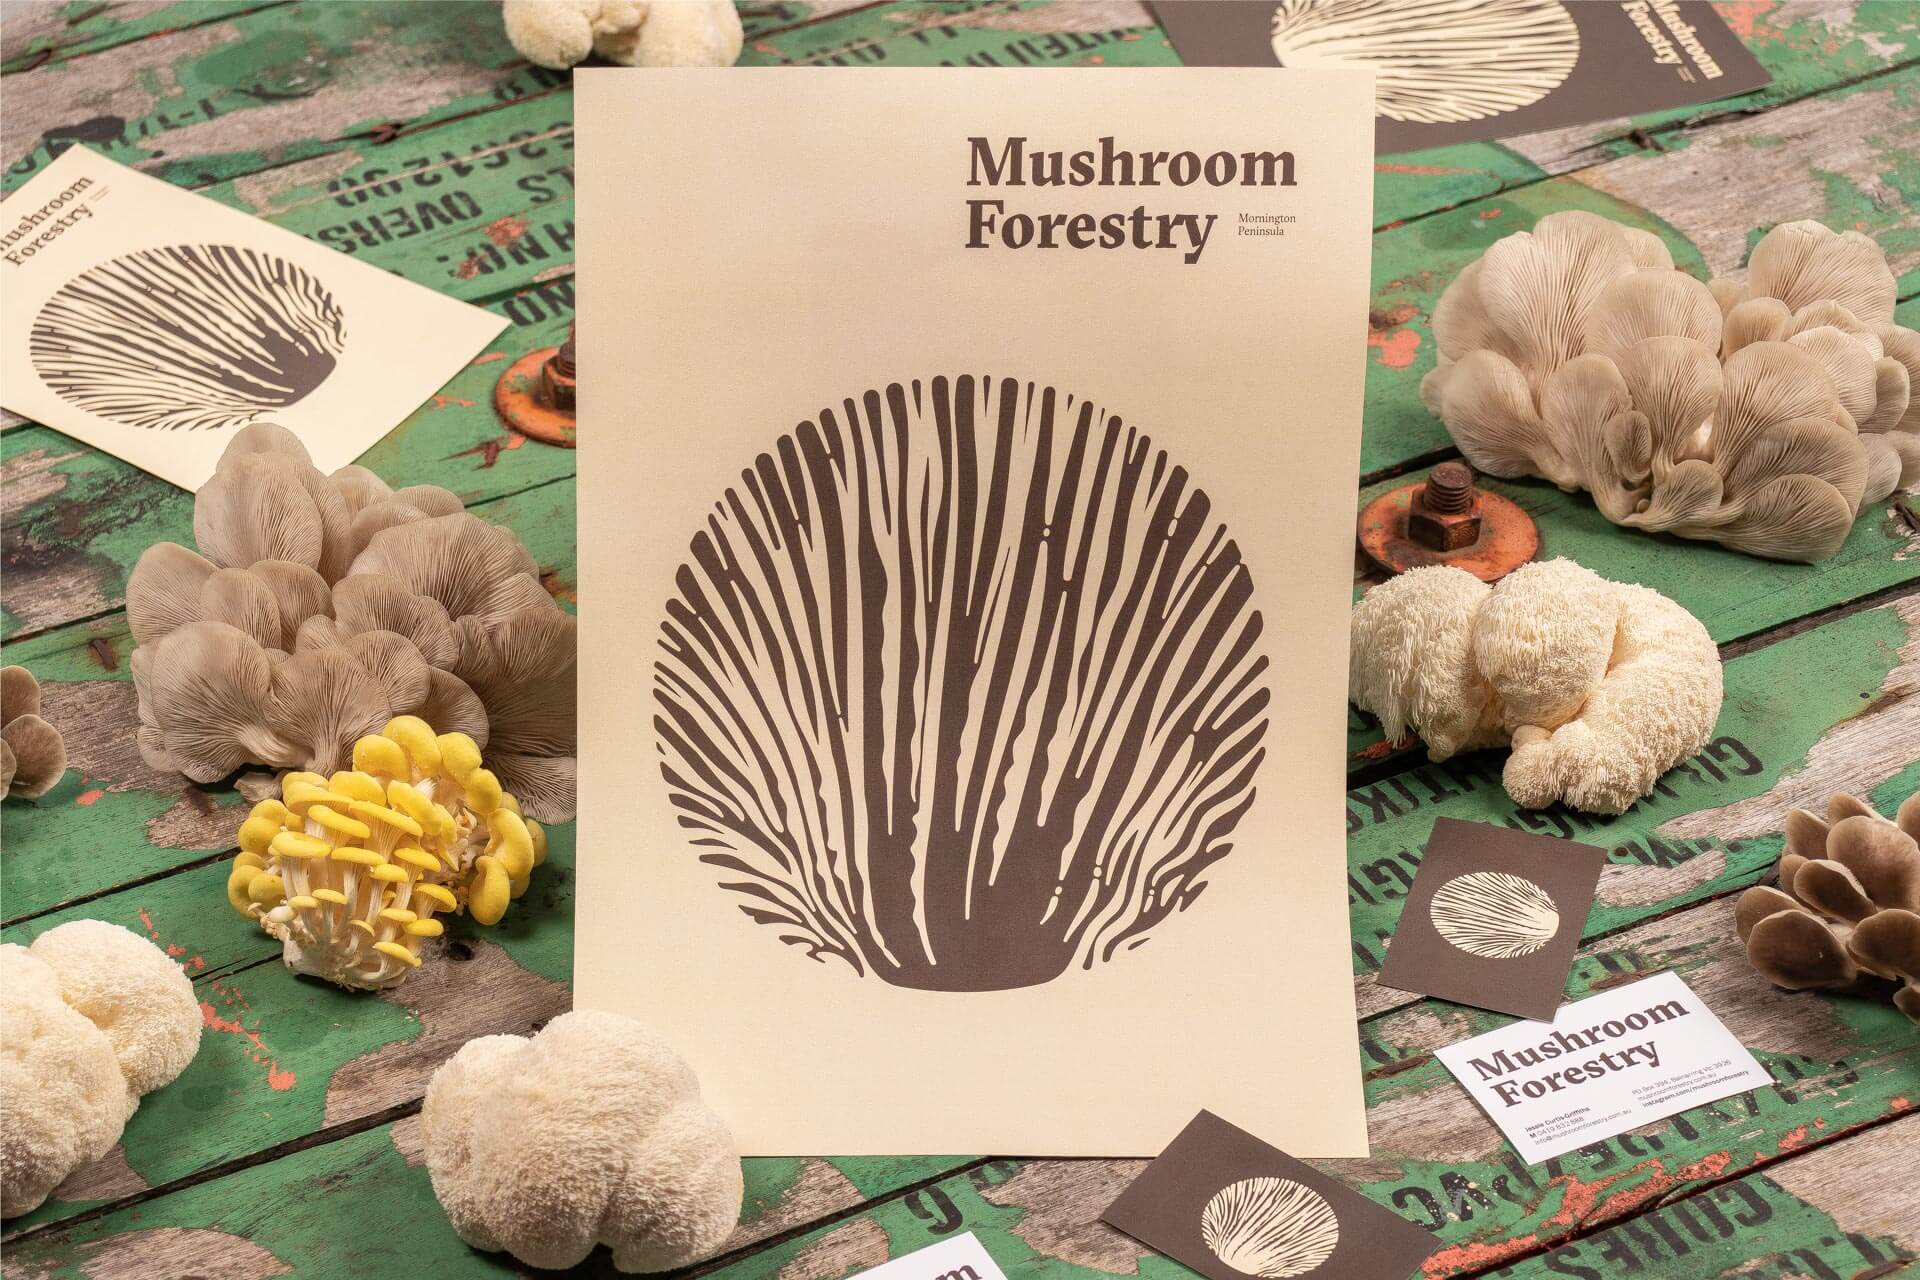 Flyer and stationary with new corporate identity for Australian brand Mushroom Forestry